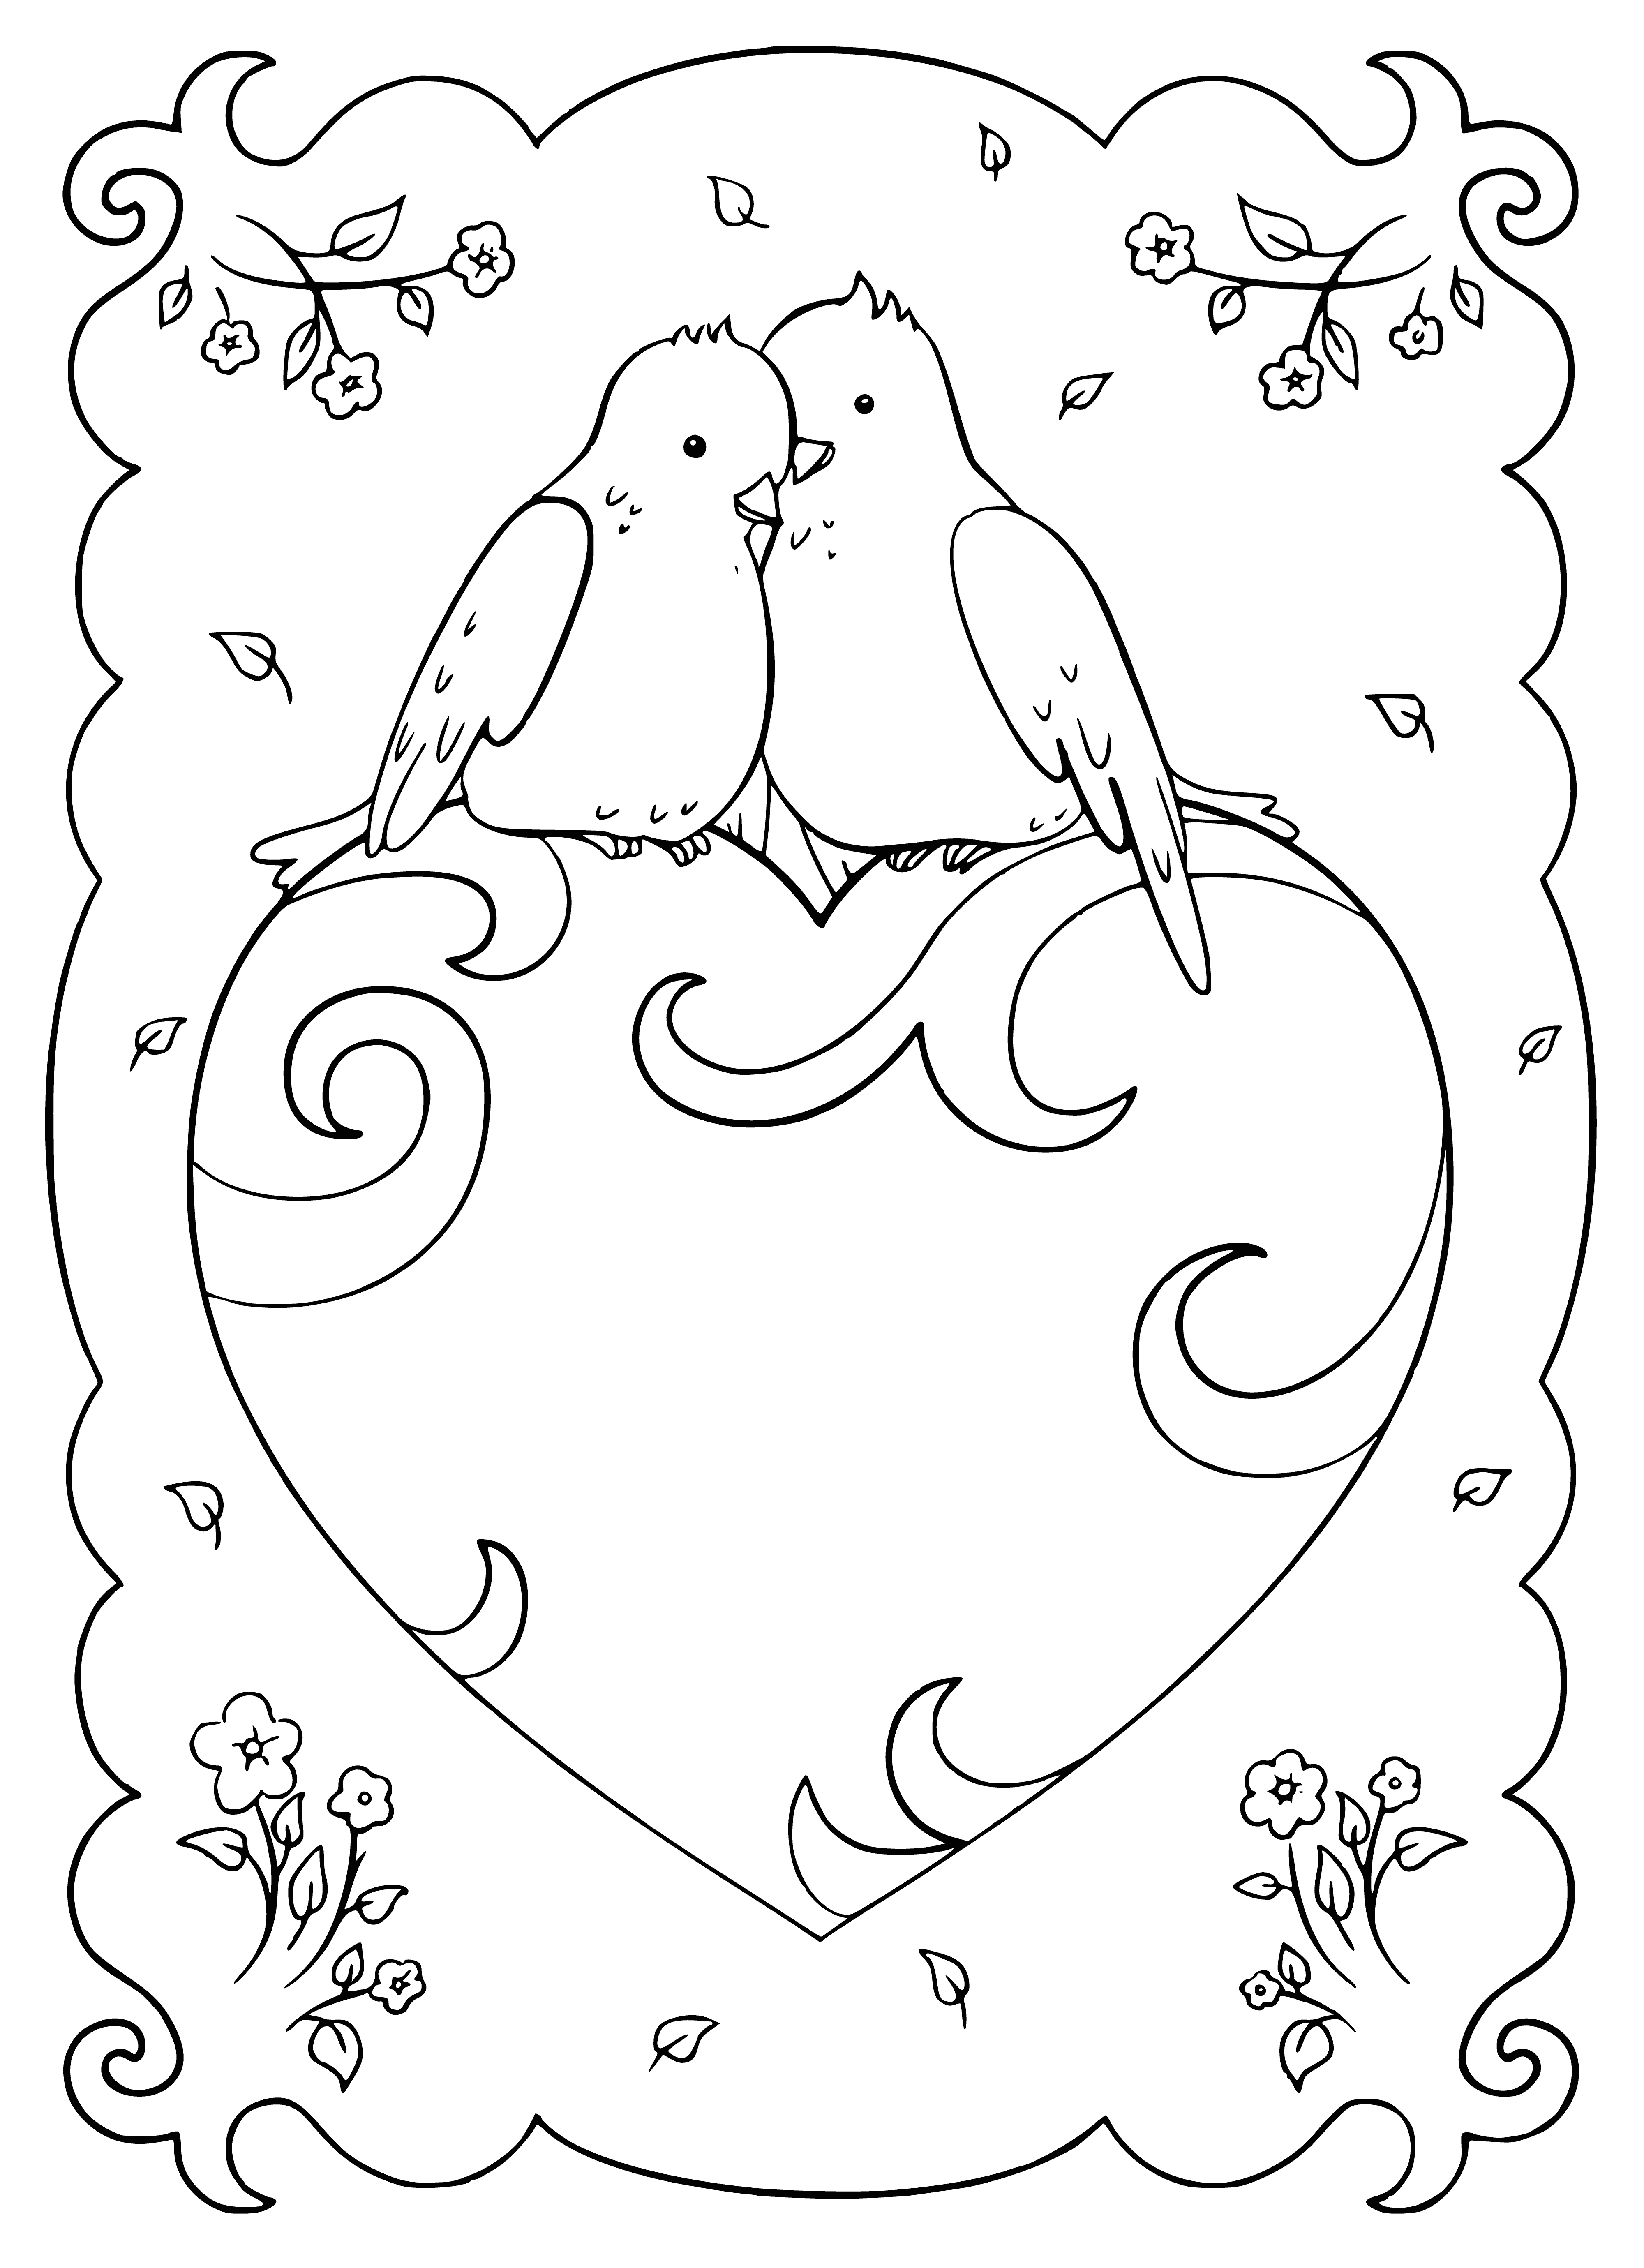 coloring page: Big red heart w/ white outline & small red, pink, & purple hearts. Surrounding words: "Happy Valentine's Day". #ValentinesDay